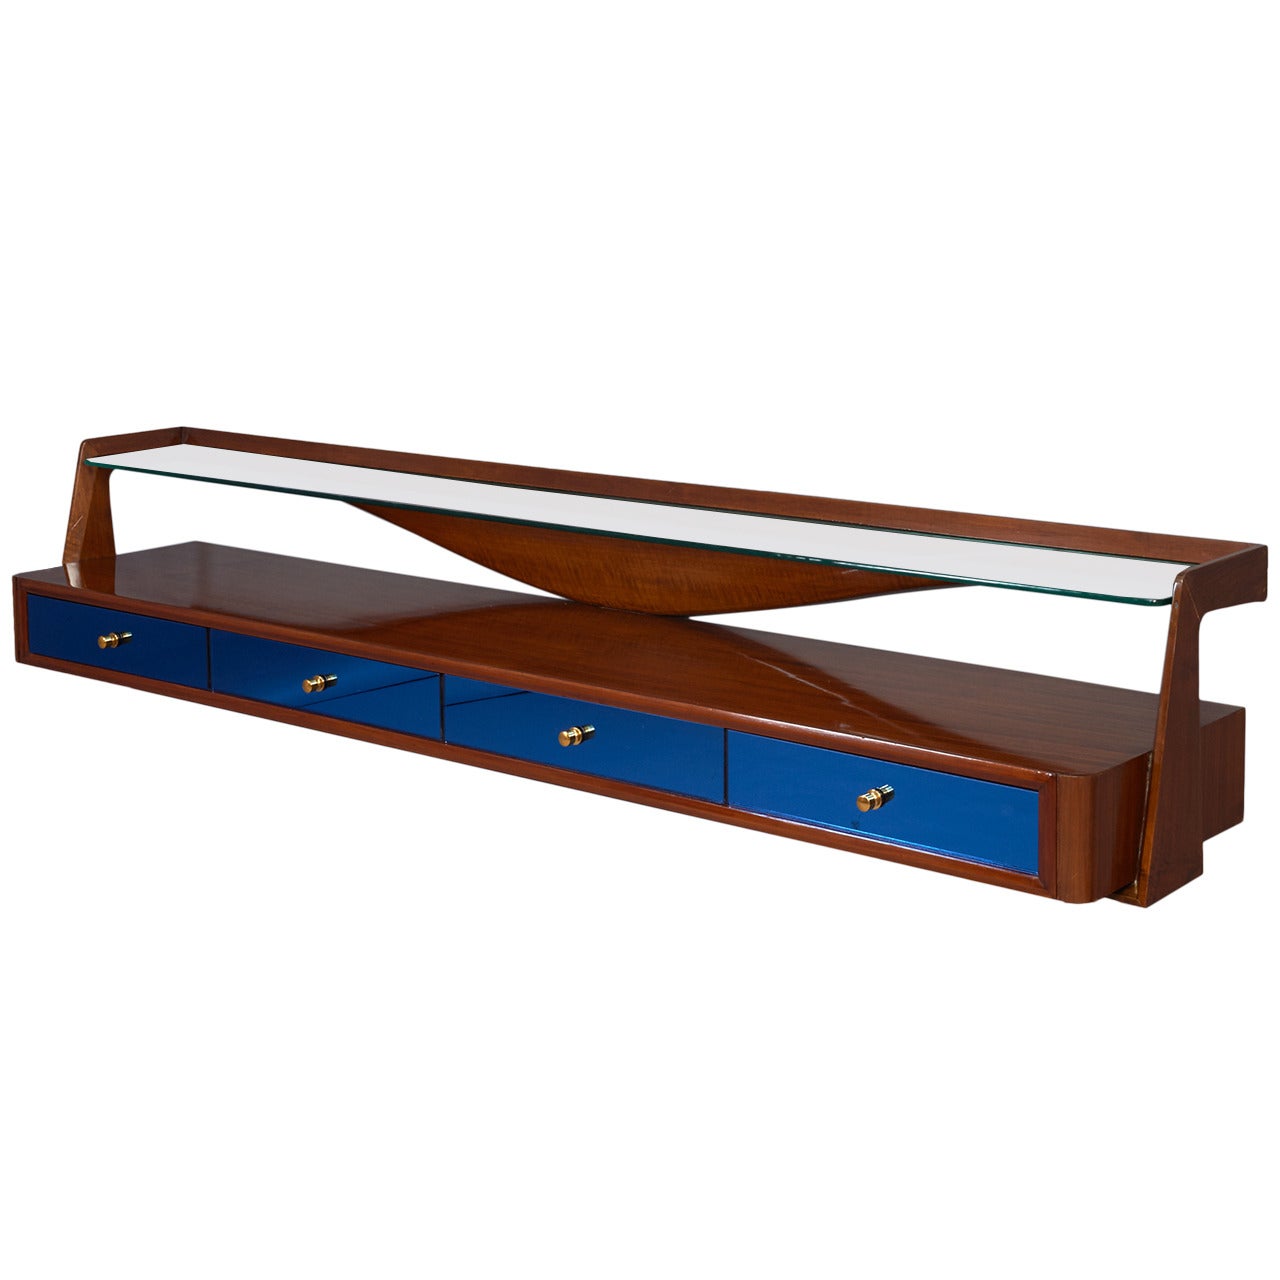 Exquisite Wall-Mounted Walnut Console with Blue Mirrored Glass, Italy 1950s